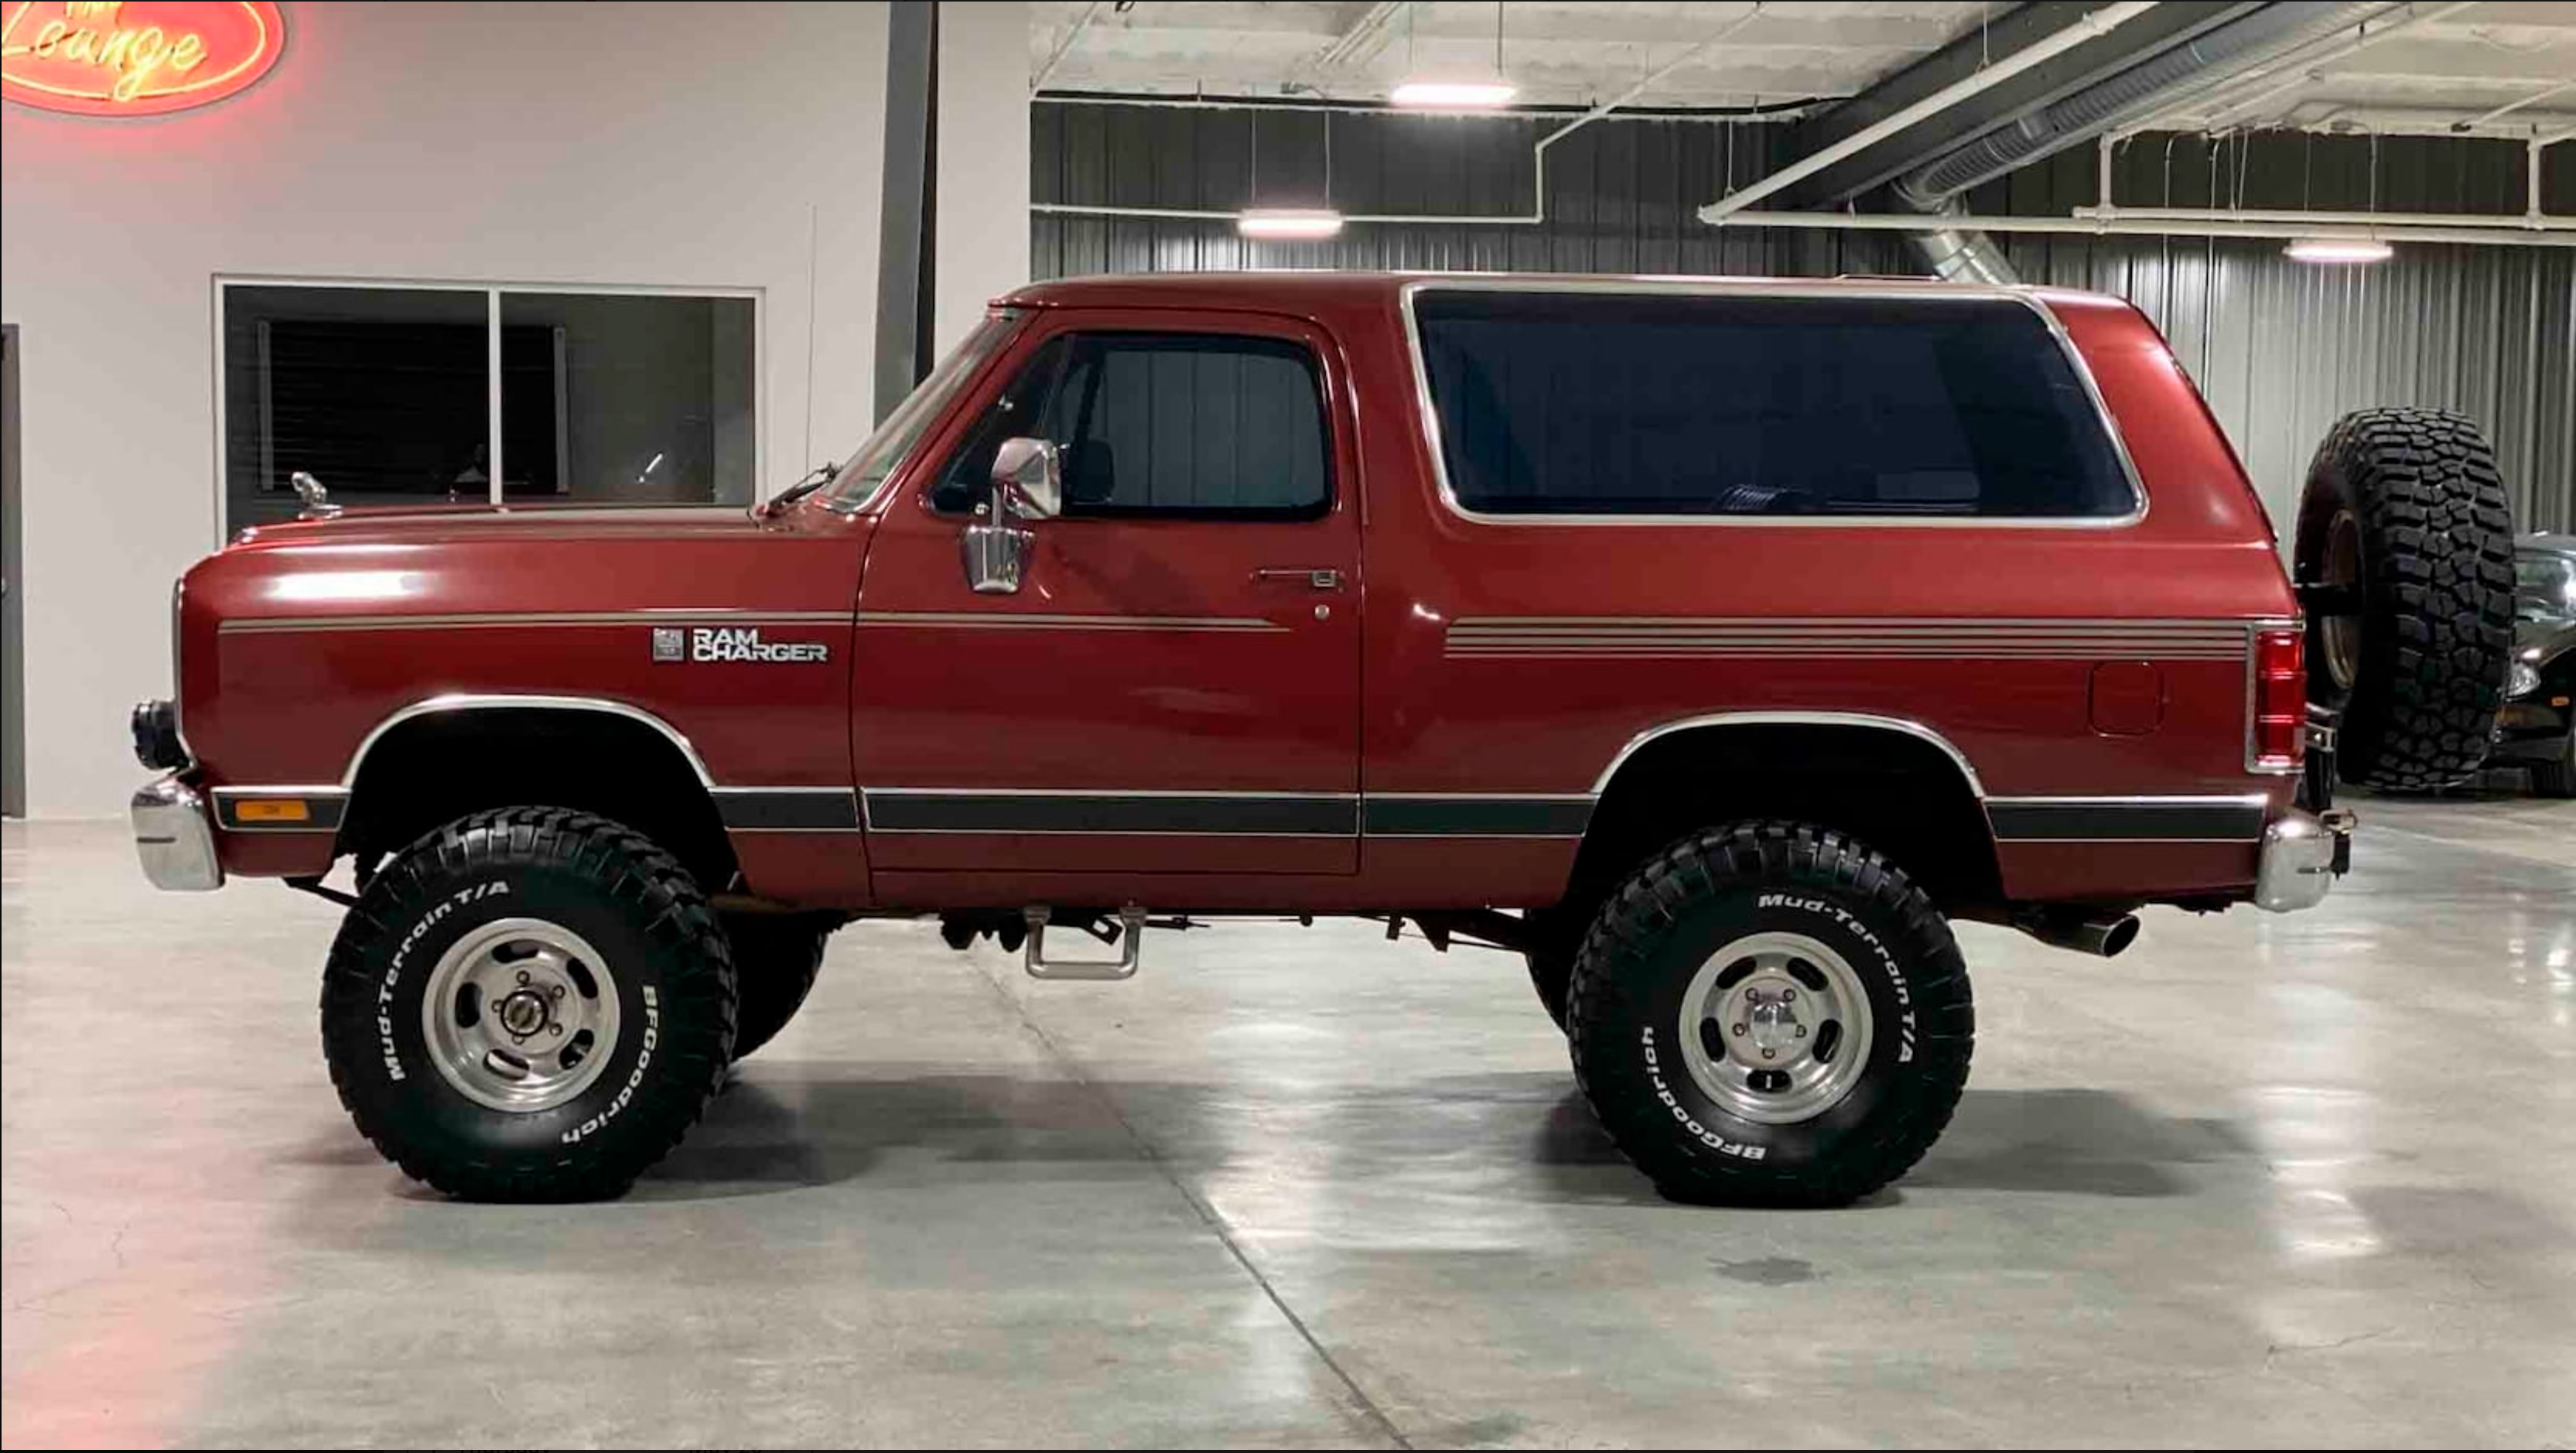 Dodge Ramcharger from 1989